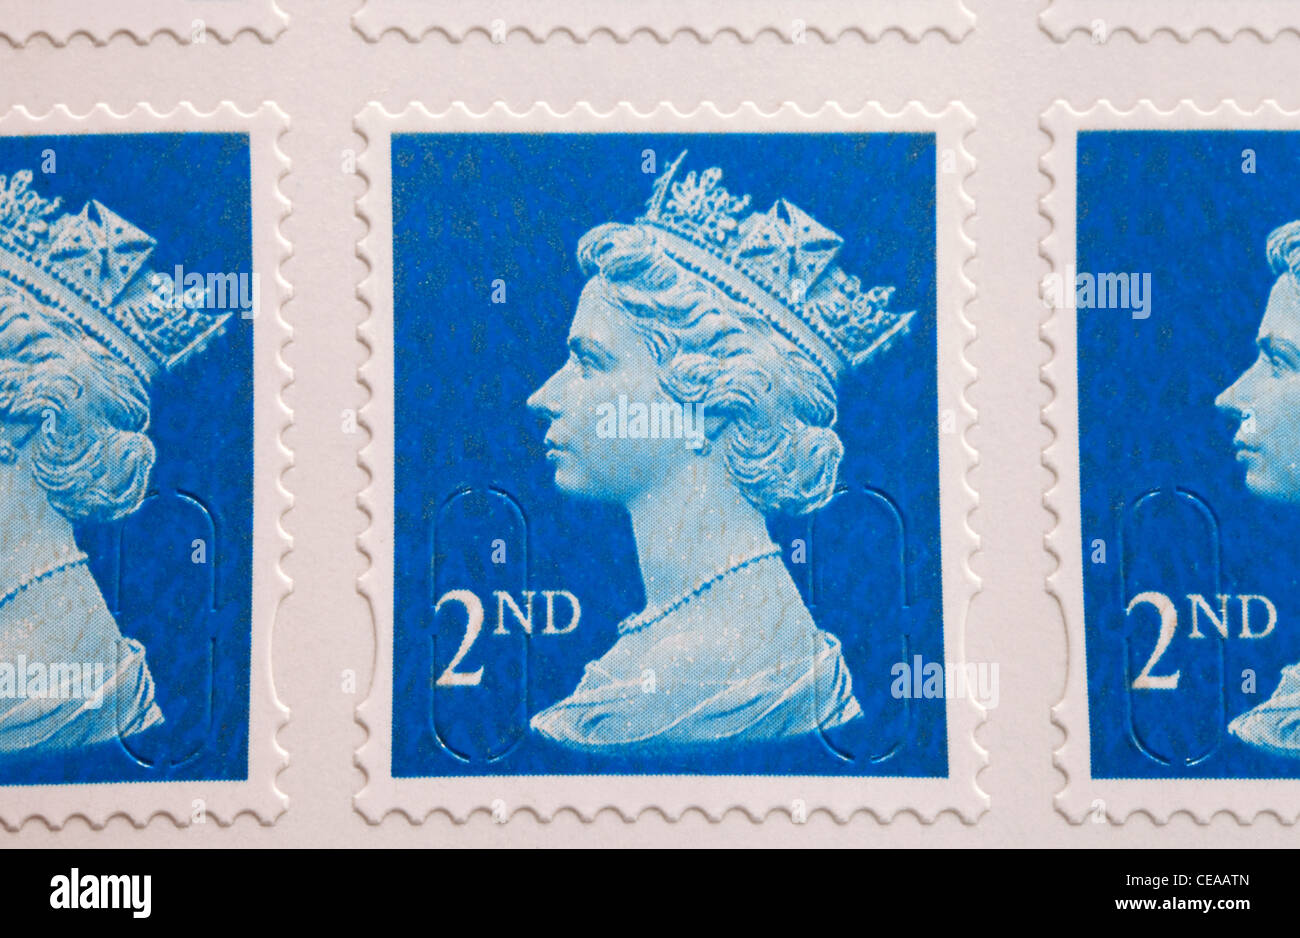 English Second class postage stamps, UK Stock Photo